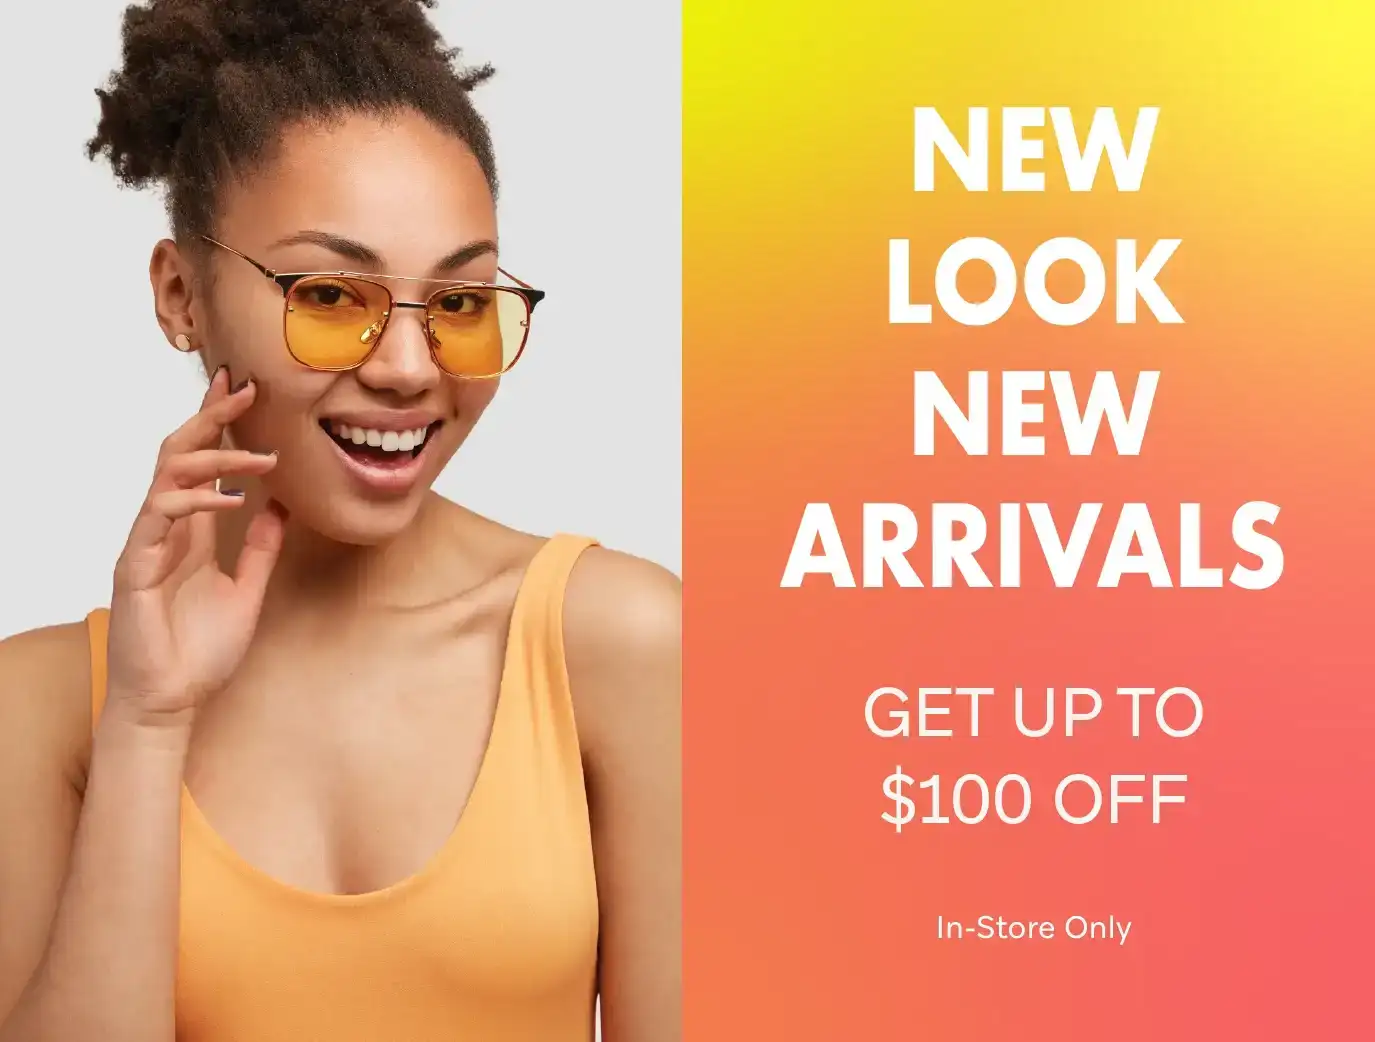 Shop the New Look New Arrivals Sale at 1001 Optometry